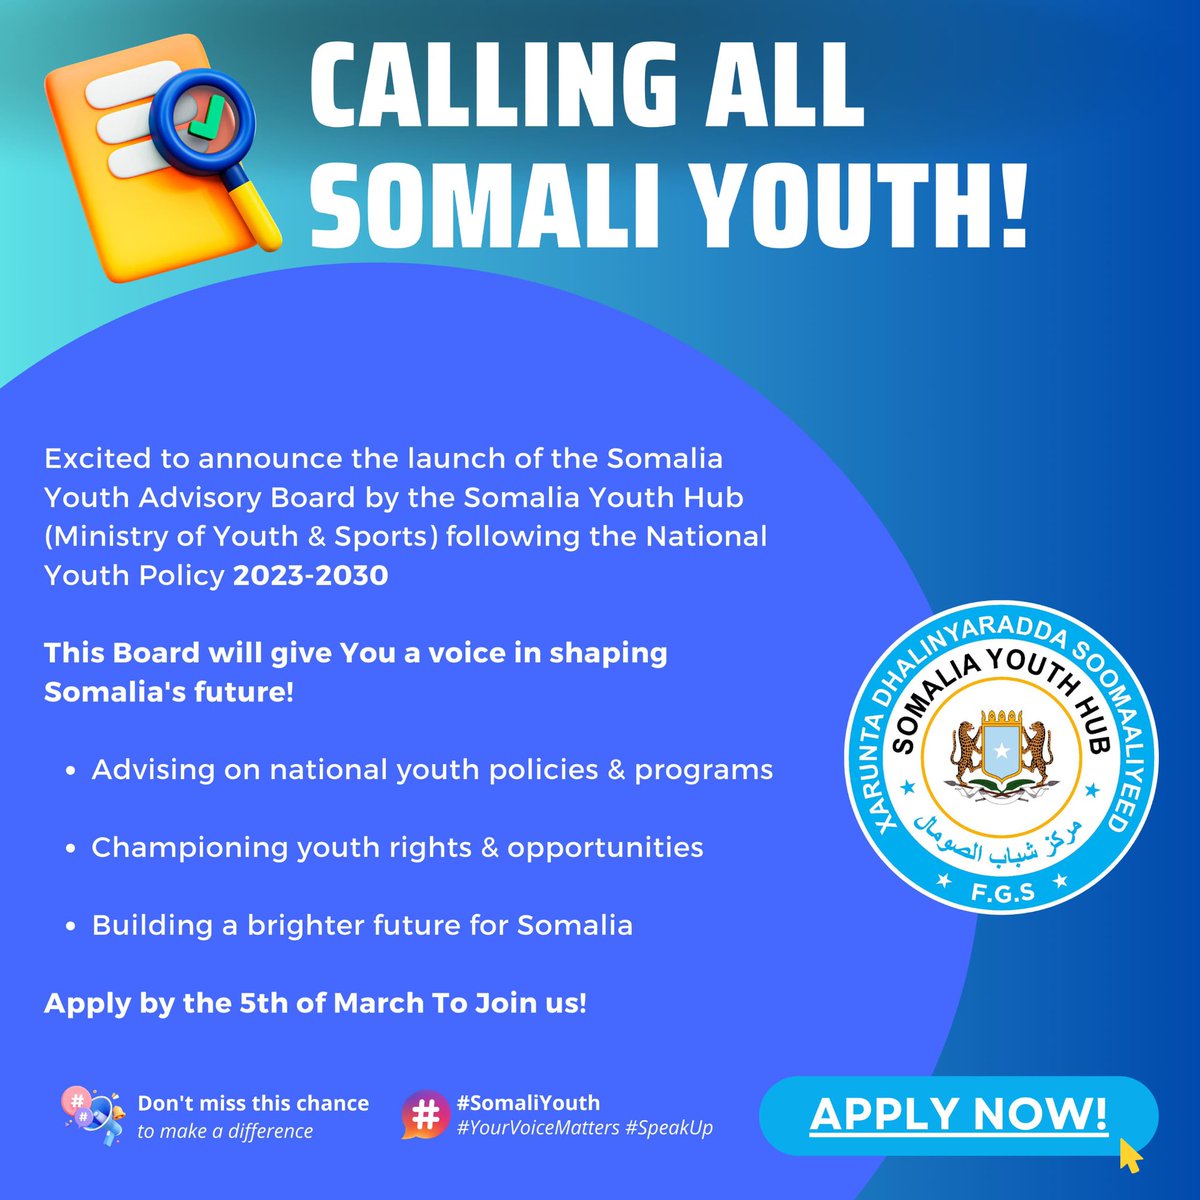 Calling all Somali youth! Excited to announce the launch of the #SomaliaYouthAdvisoryBoard by the Somalia Youth Hub at @MoysFGS This Board will give YOU a voice in shaping Somalia's future! ️ Apply by March 5th to join us: ⬇️ Apply now: forms.gle/1JojFzR8JzQhJf…